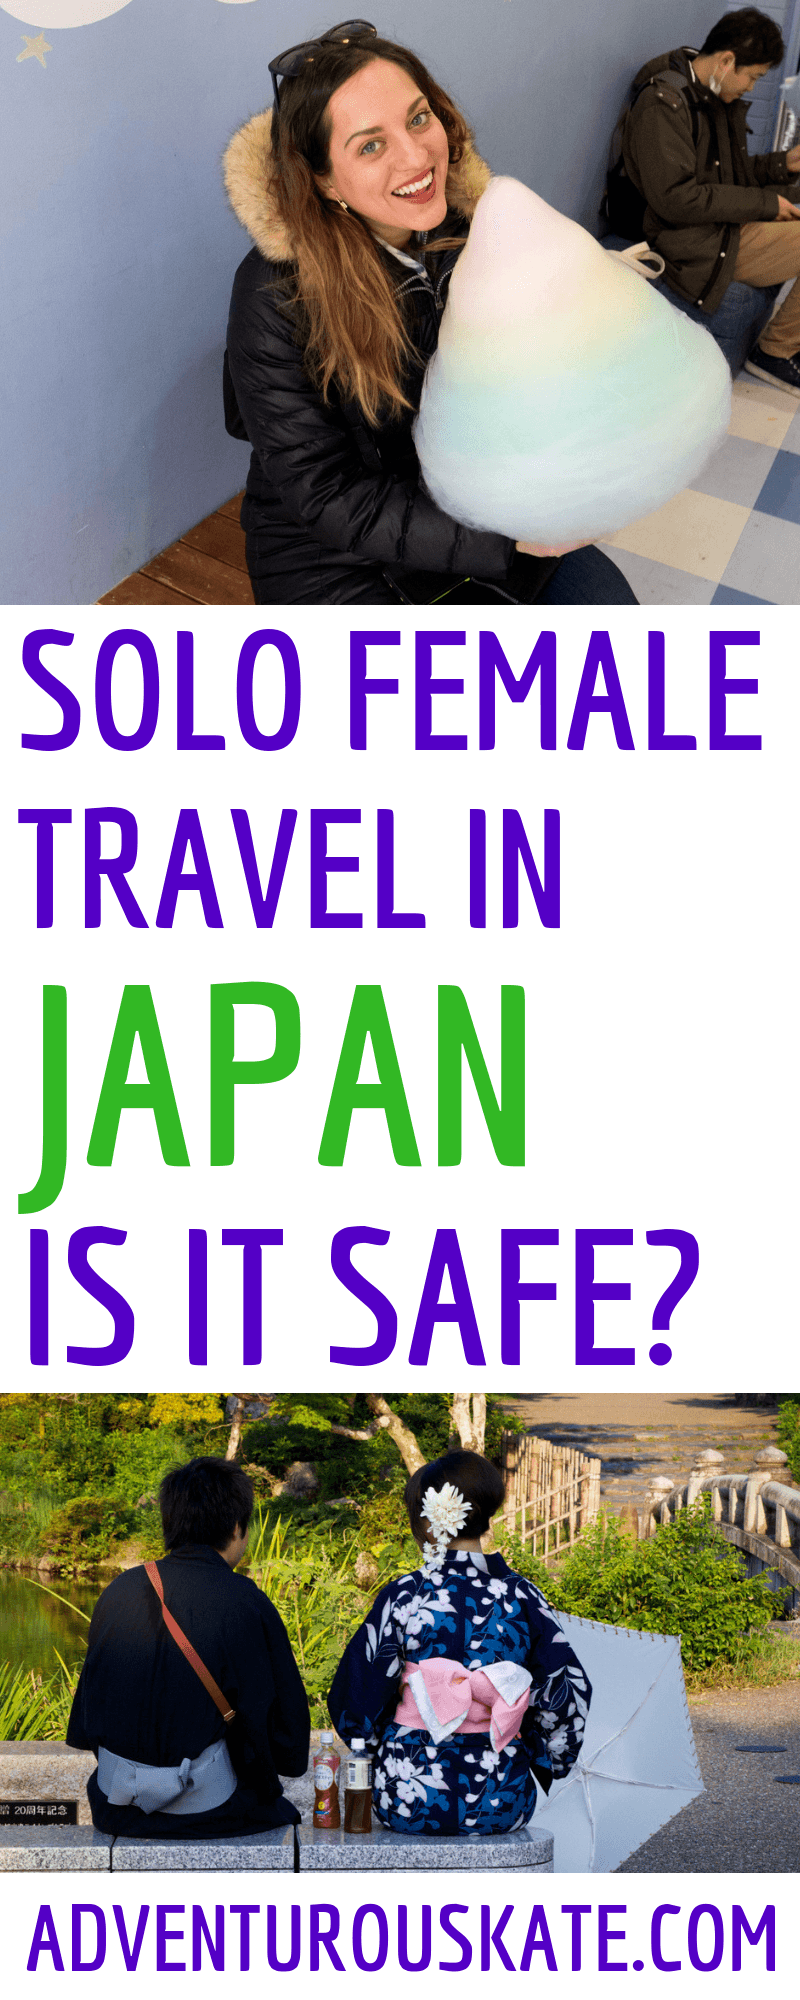 Solo Female Travel in Japan - Yes, its Safe, but Isolating